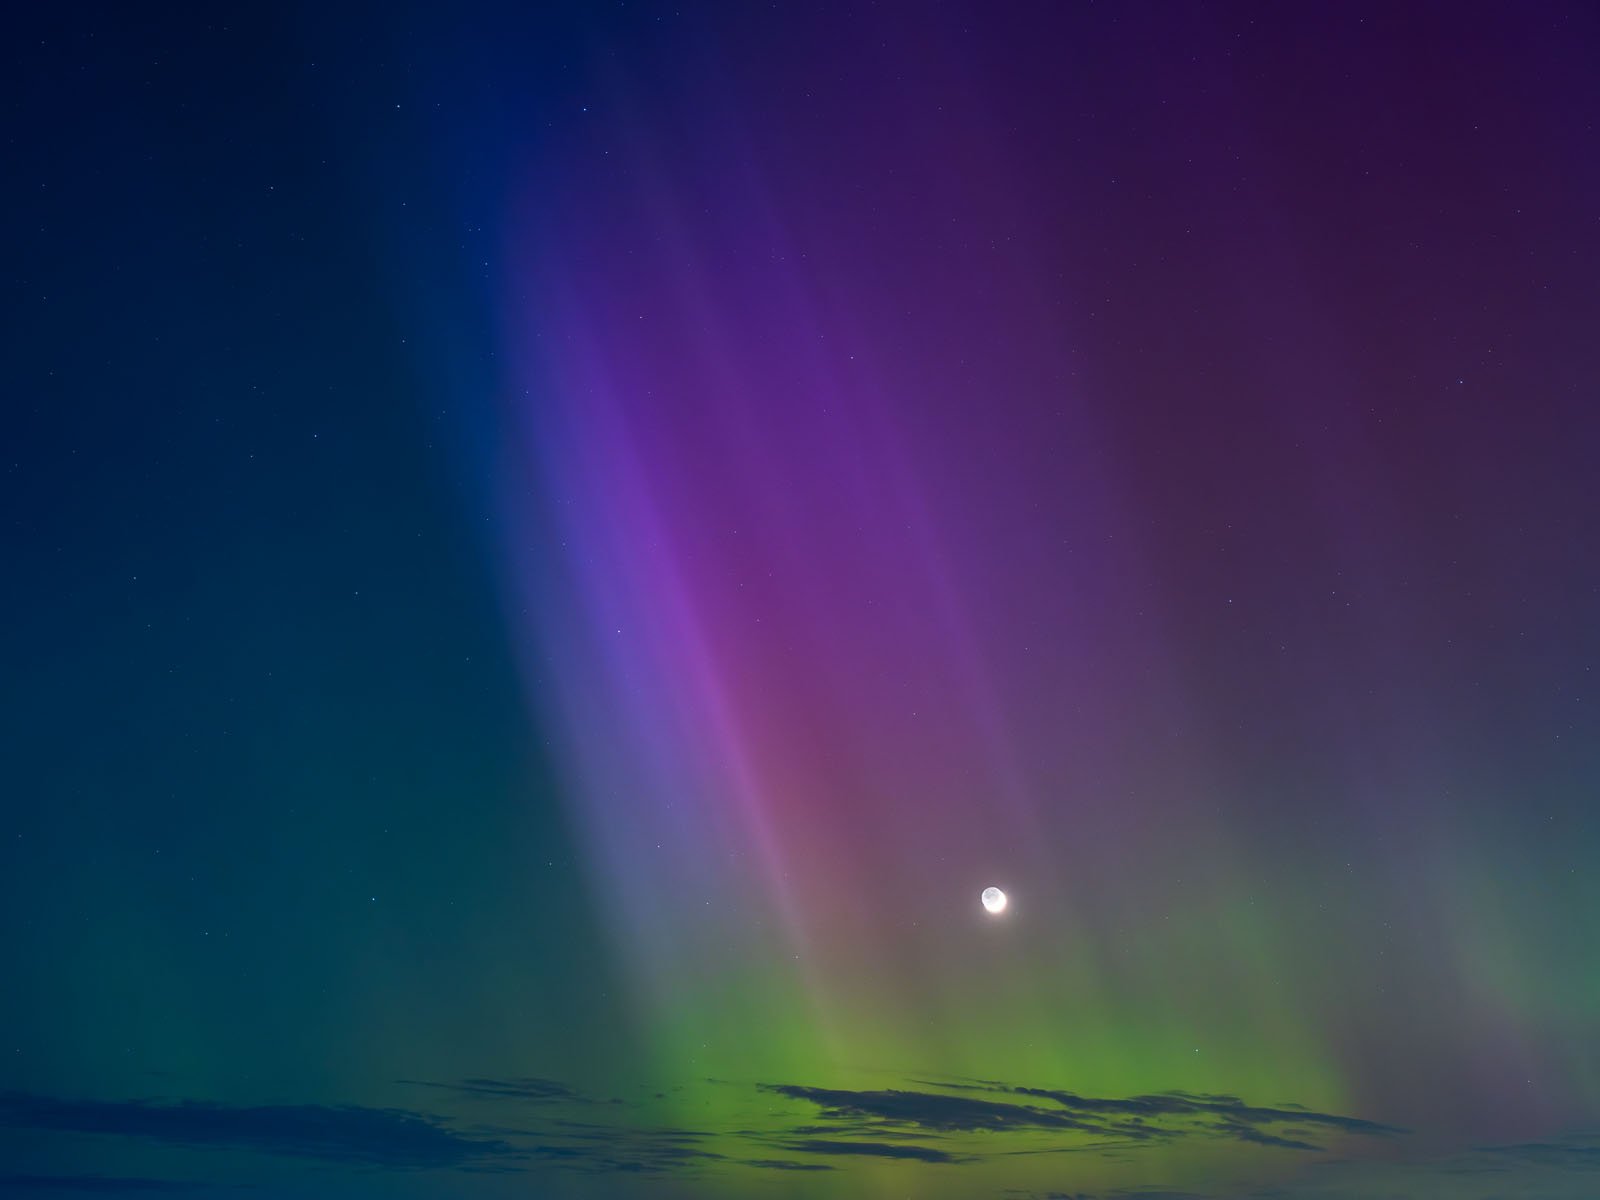 A vibrant display of the northern lights in a clear night sky, with vivid colors ranging from deep violet to bright green, alongside a visible moon.